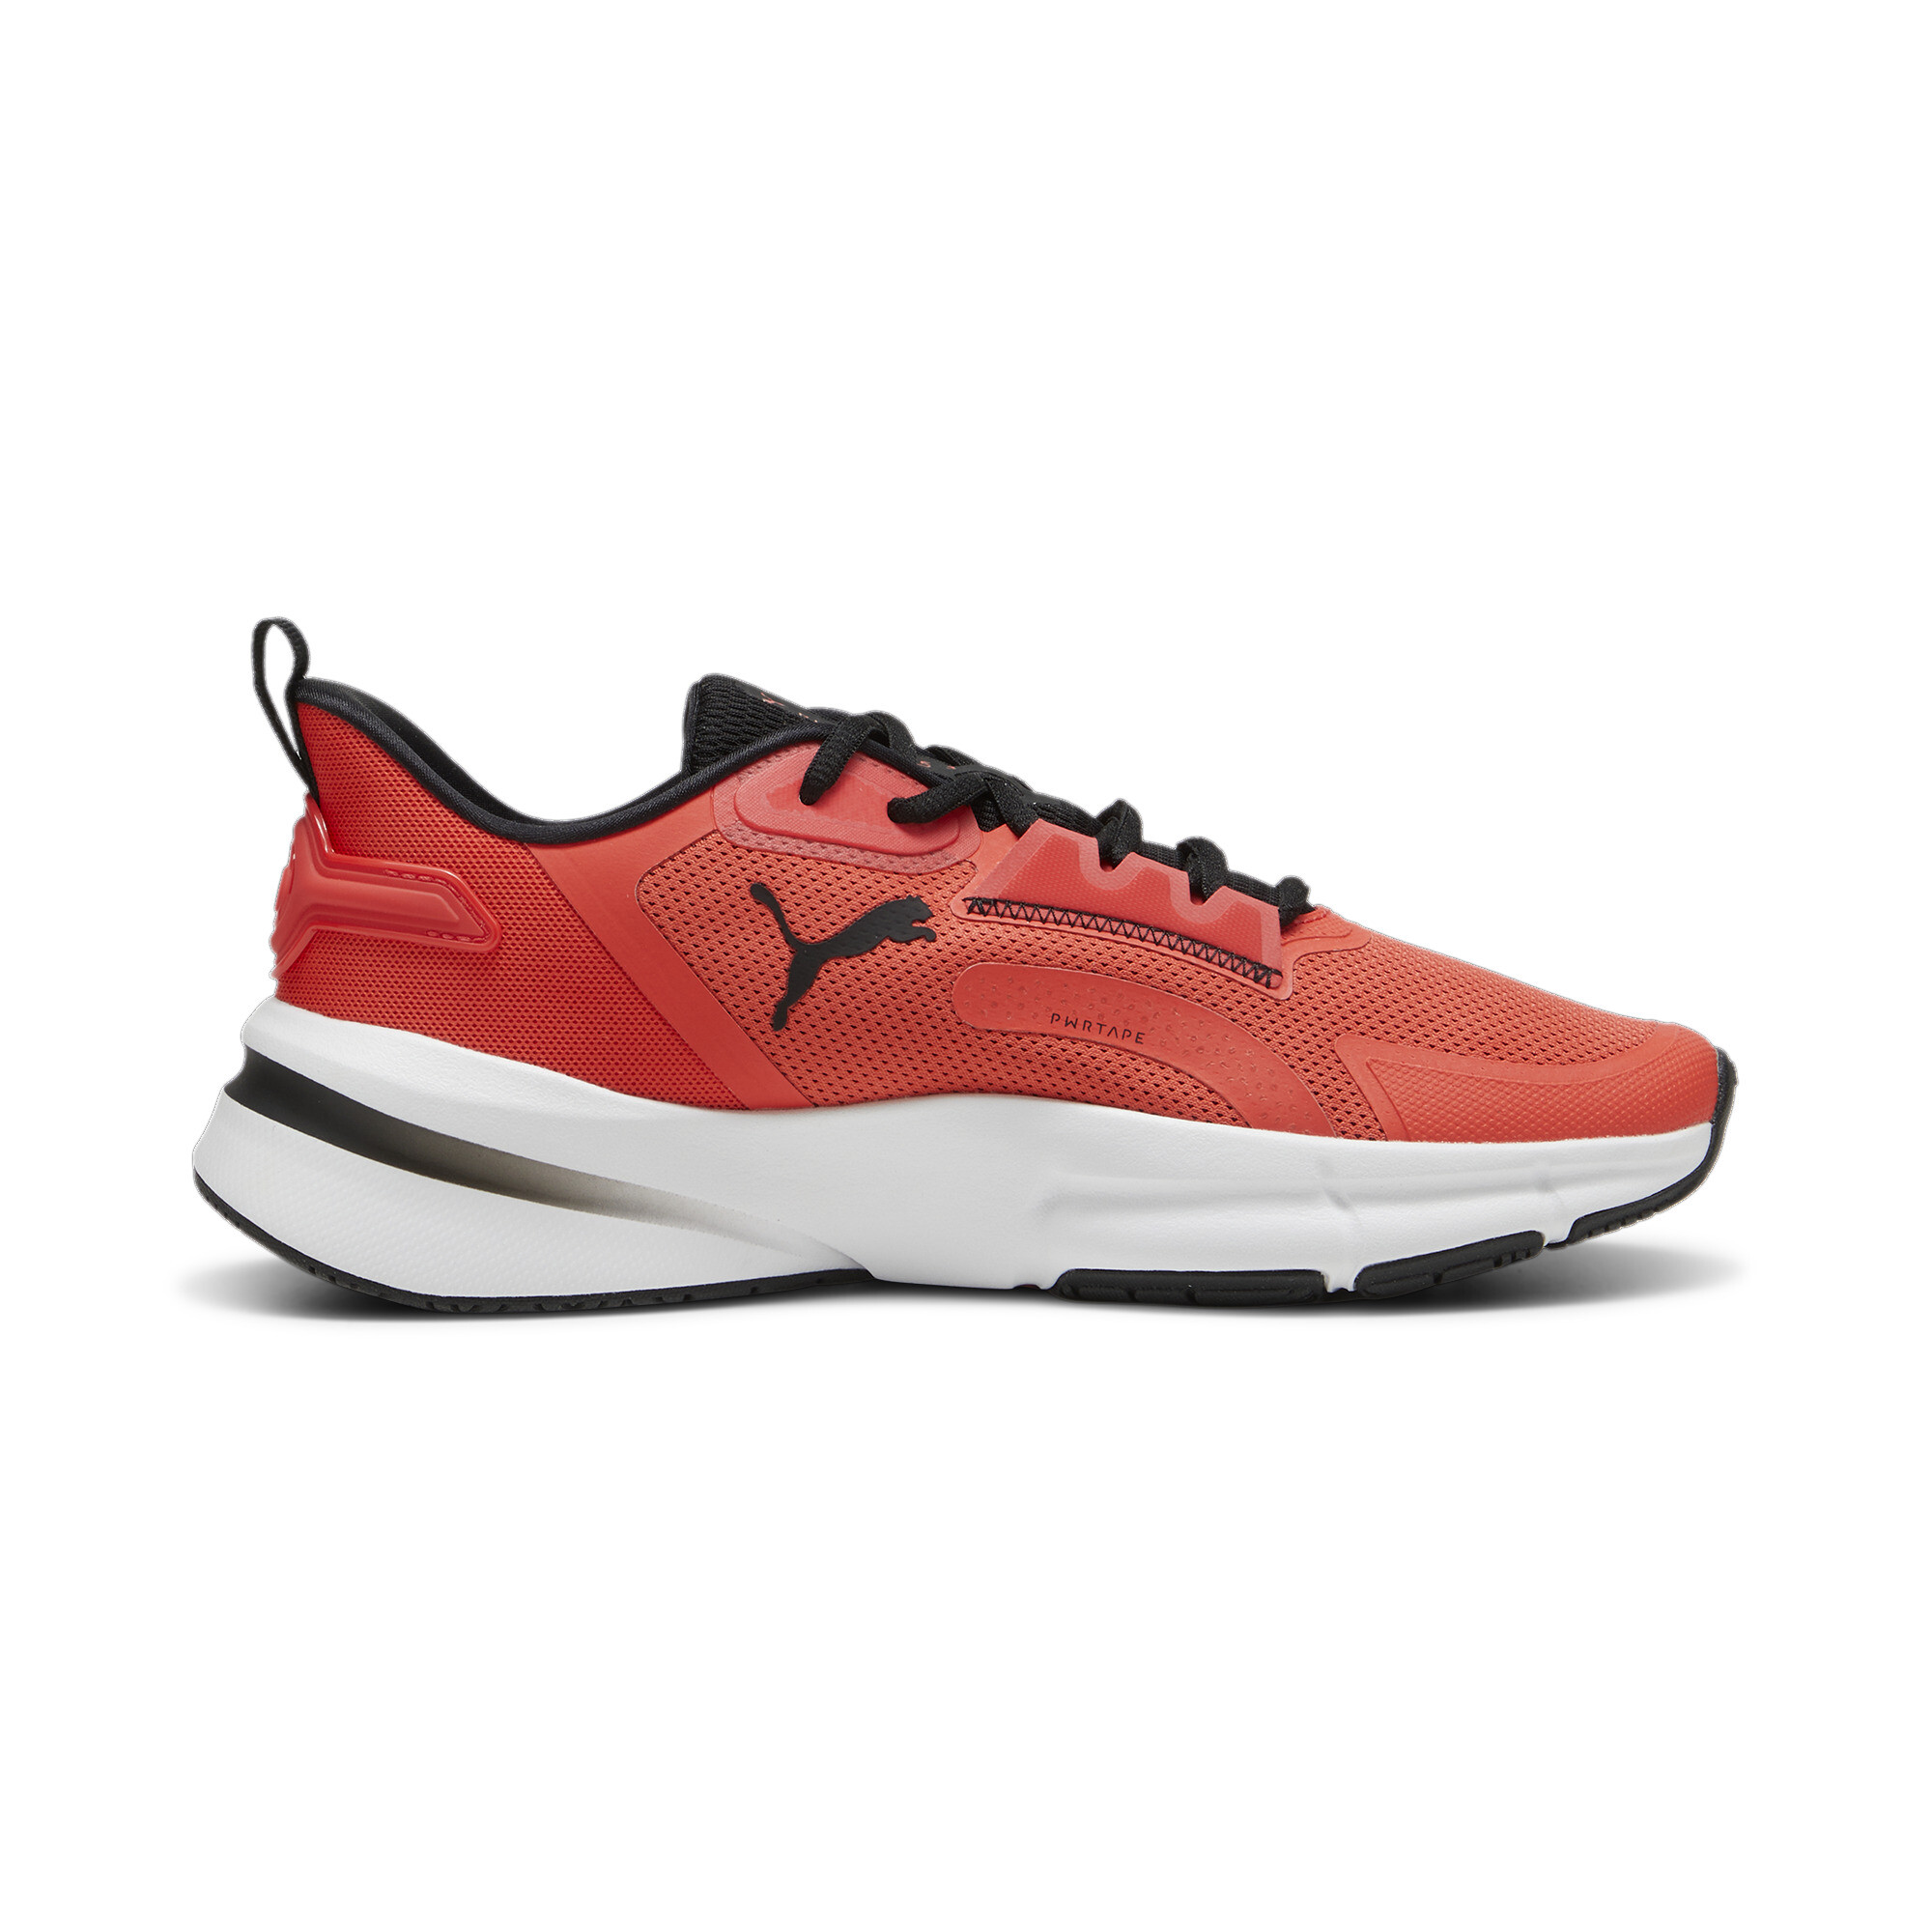 Men's PUMA PWRFrame TR 3 Training Shoes In Red, Size EU 42